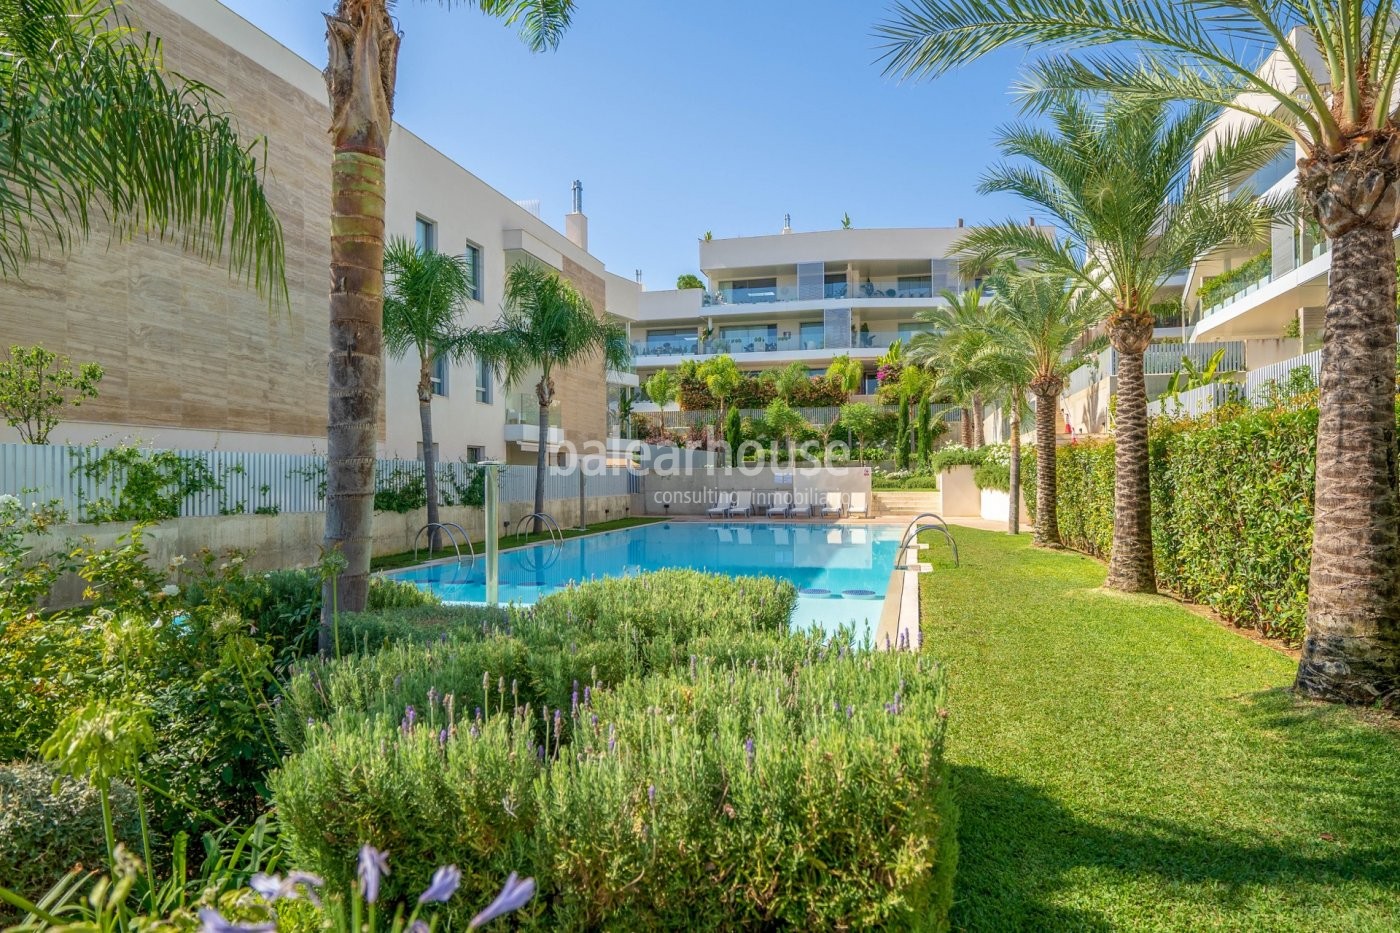 Excellent south-facing flat in Palma in a well-kept complex next to the golf course.